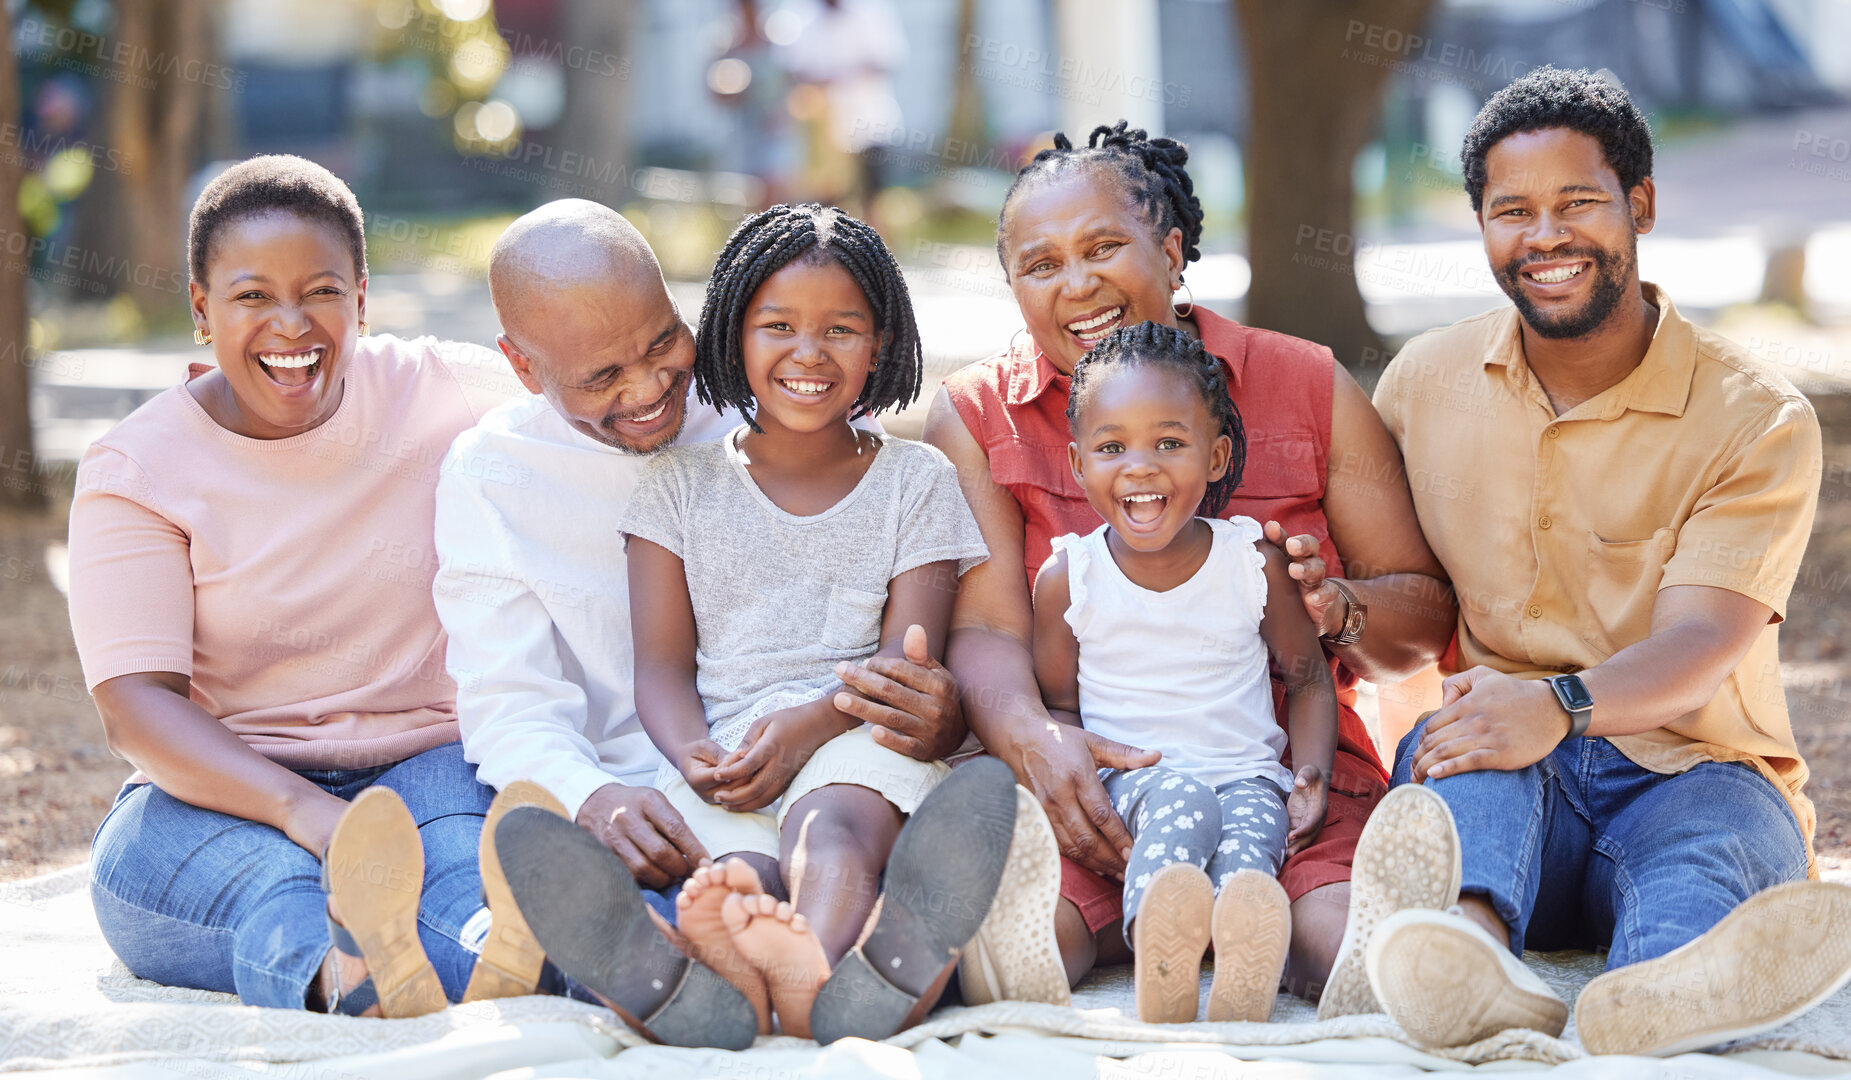 Buy stock photo Generation of happy family, picnic in park and garden for summer in nature outdoors to relax, care and quality time together. Black people portrait of grandparents, parents and children enjoying day